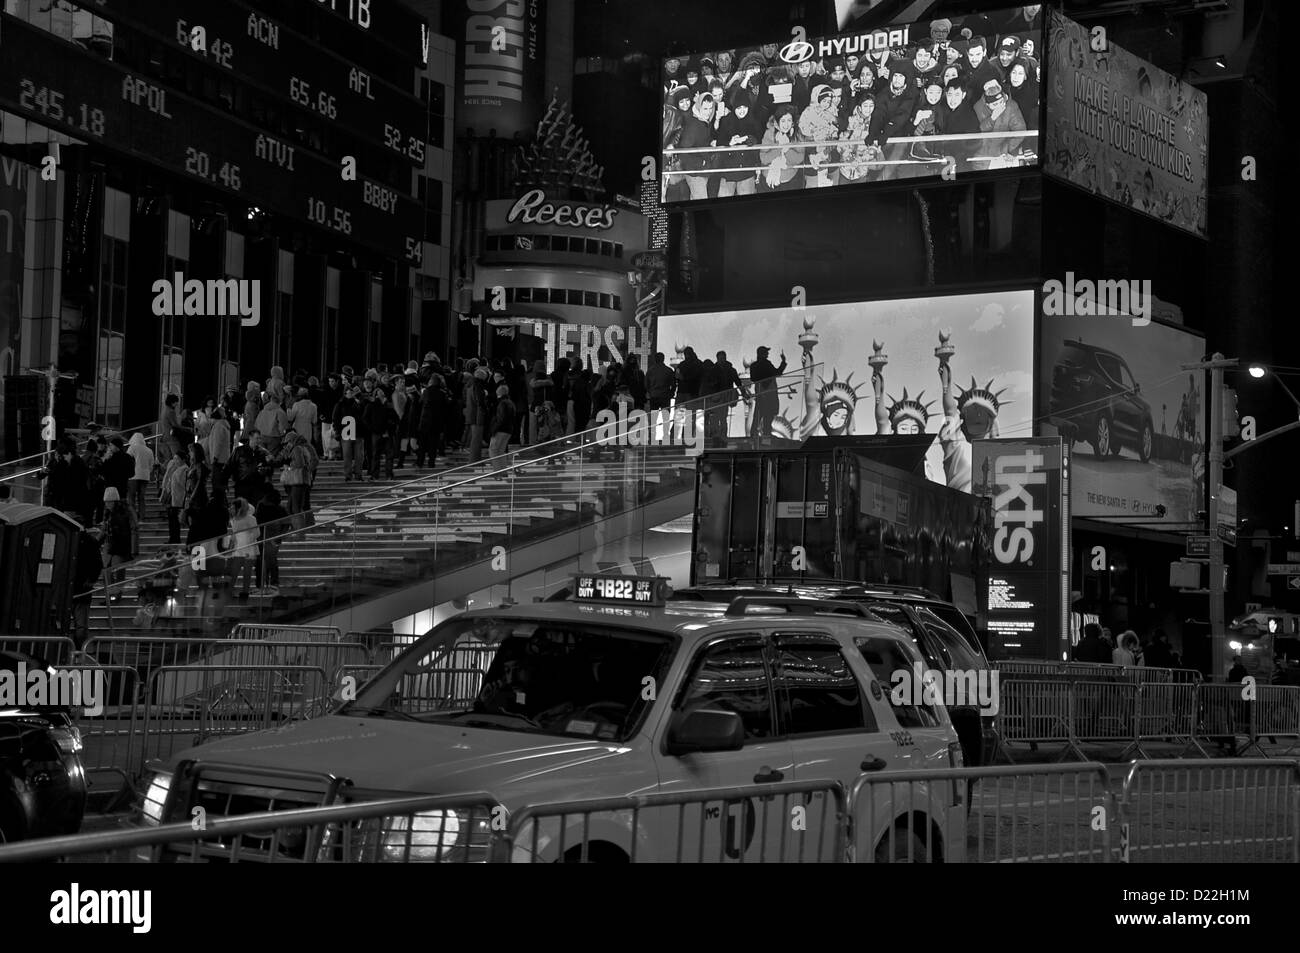 People gather in Times Square on New Year's Eve, NYC Stock Photo